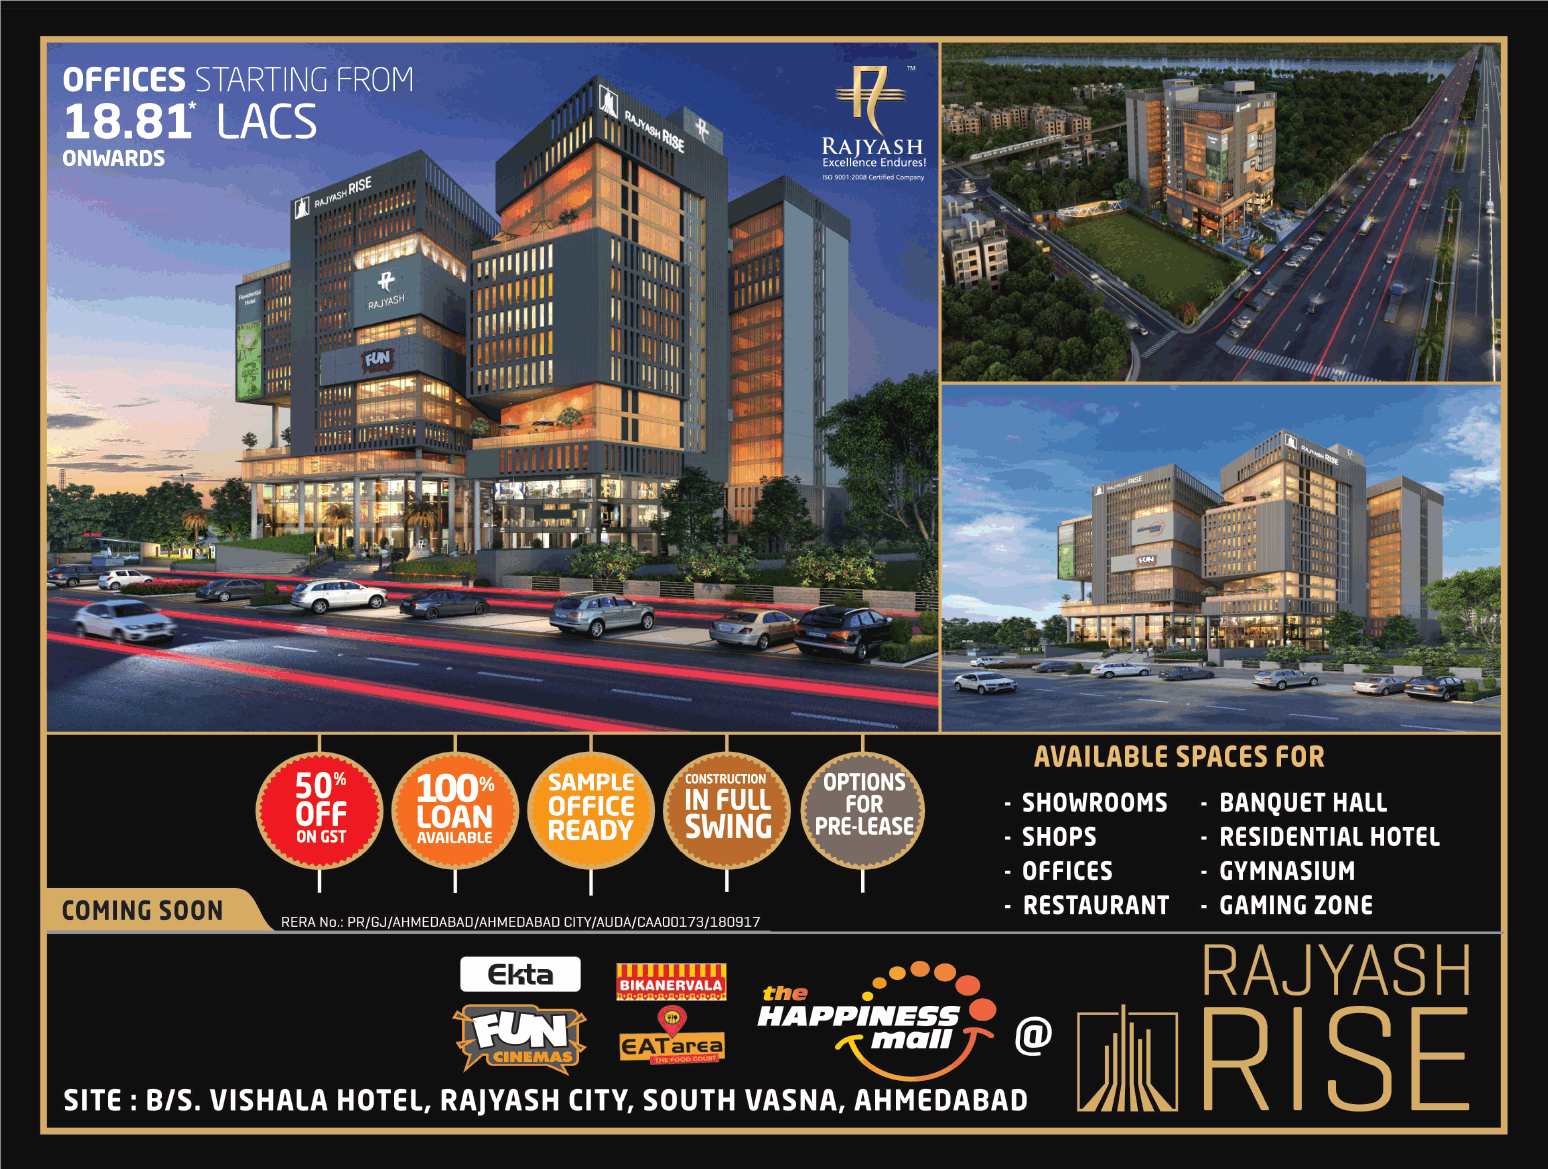 Book offices @ Rs. 18.81 Lacs at Rajyash Rise in Ahmedabad Update